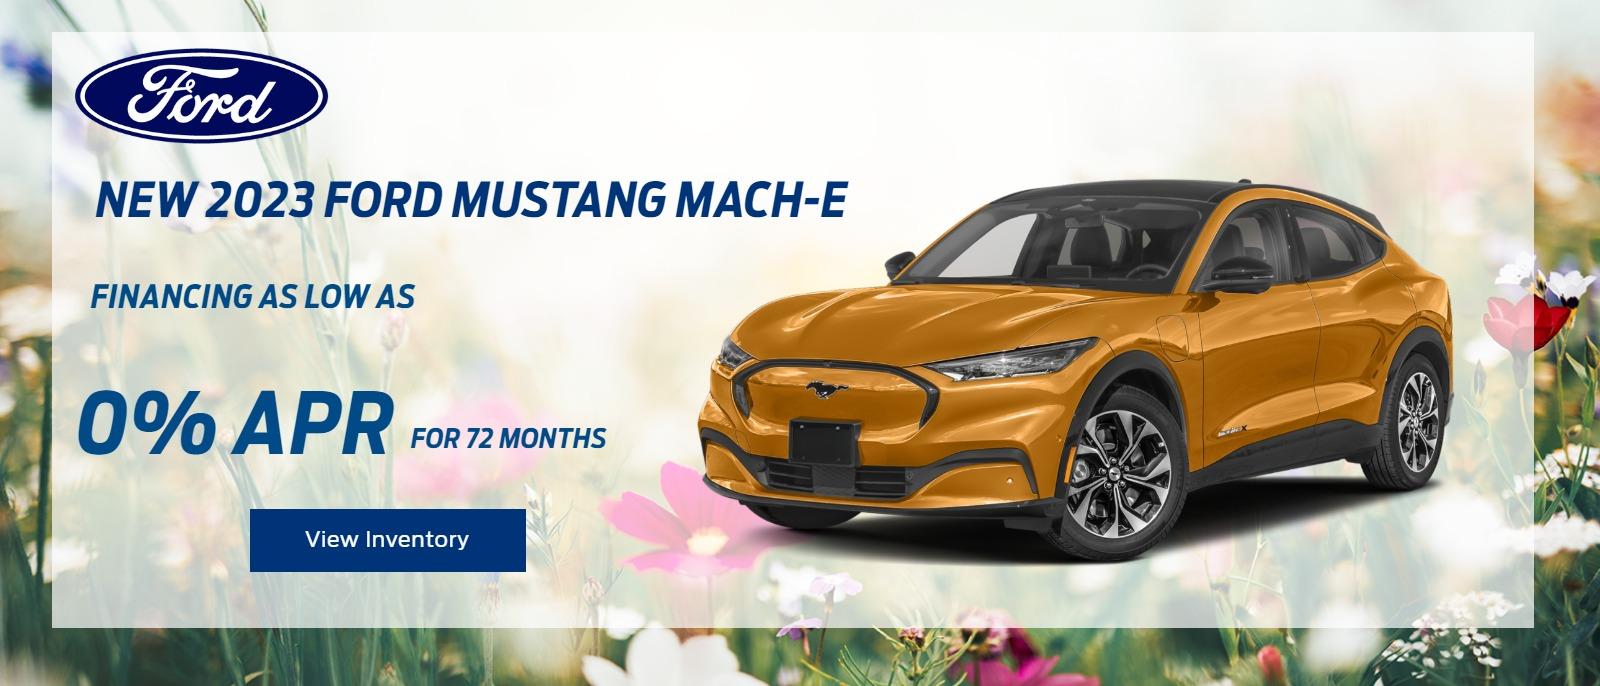 New 2023 Ford Mustang Mach-E
 Finance as low as 0% for 60 months + Get Up to $2000 Rebate